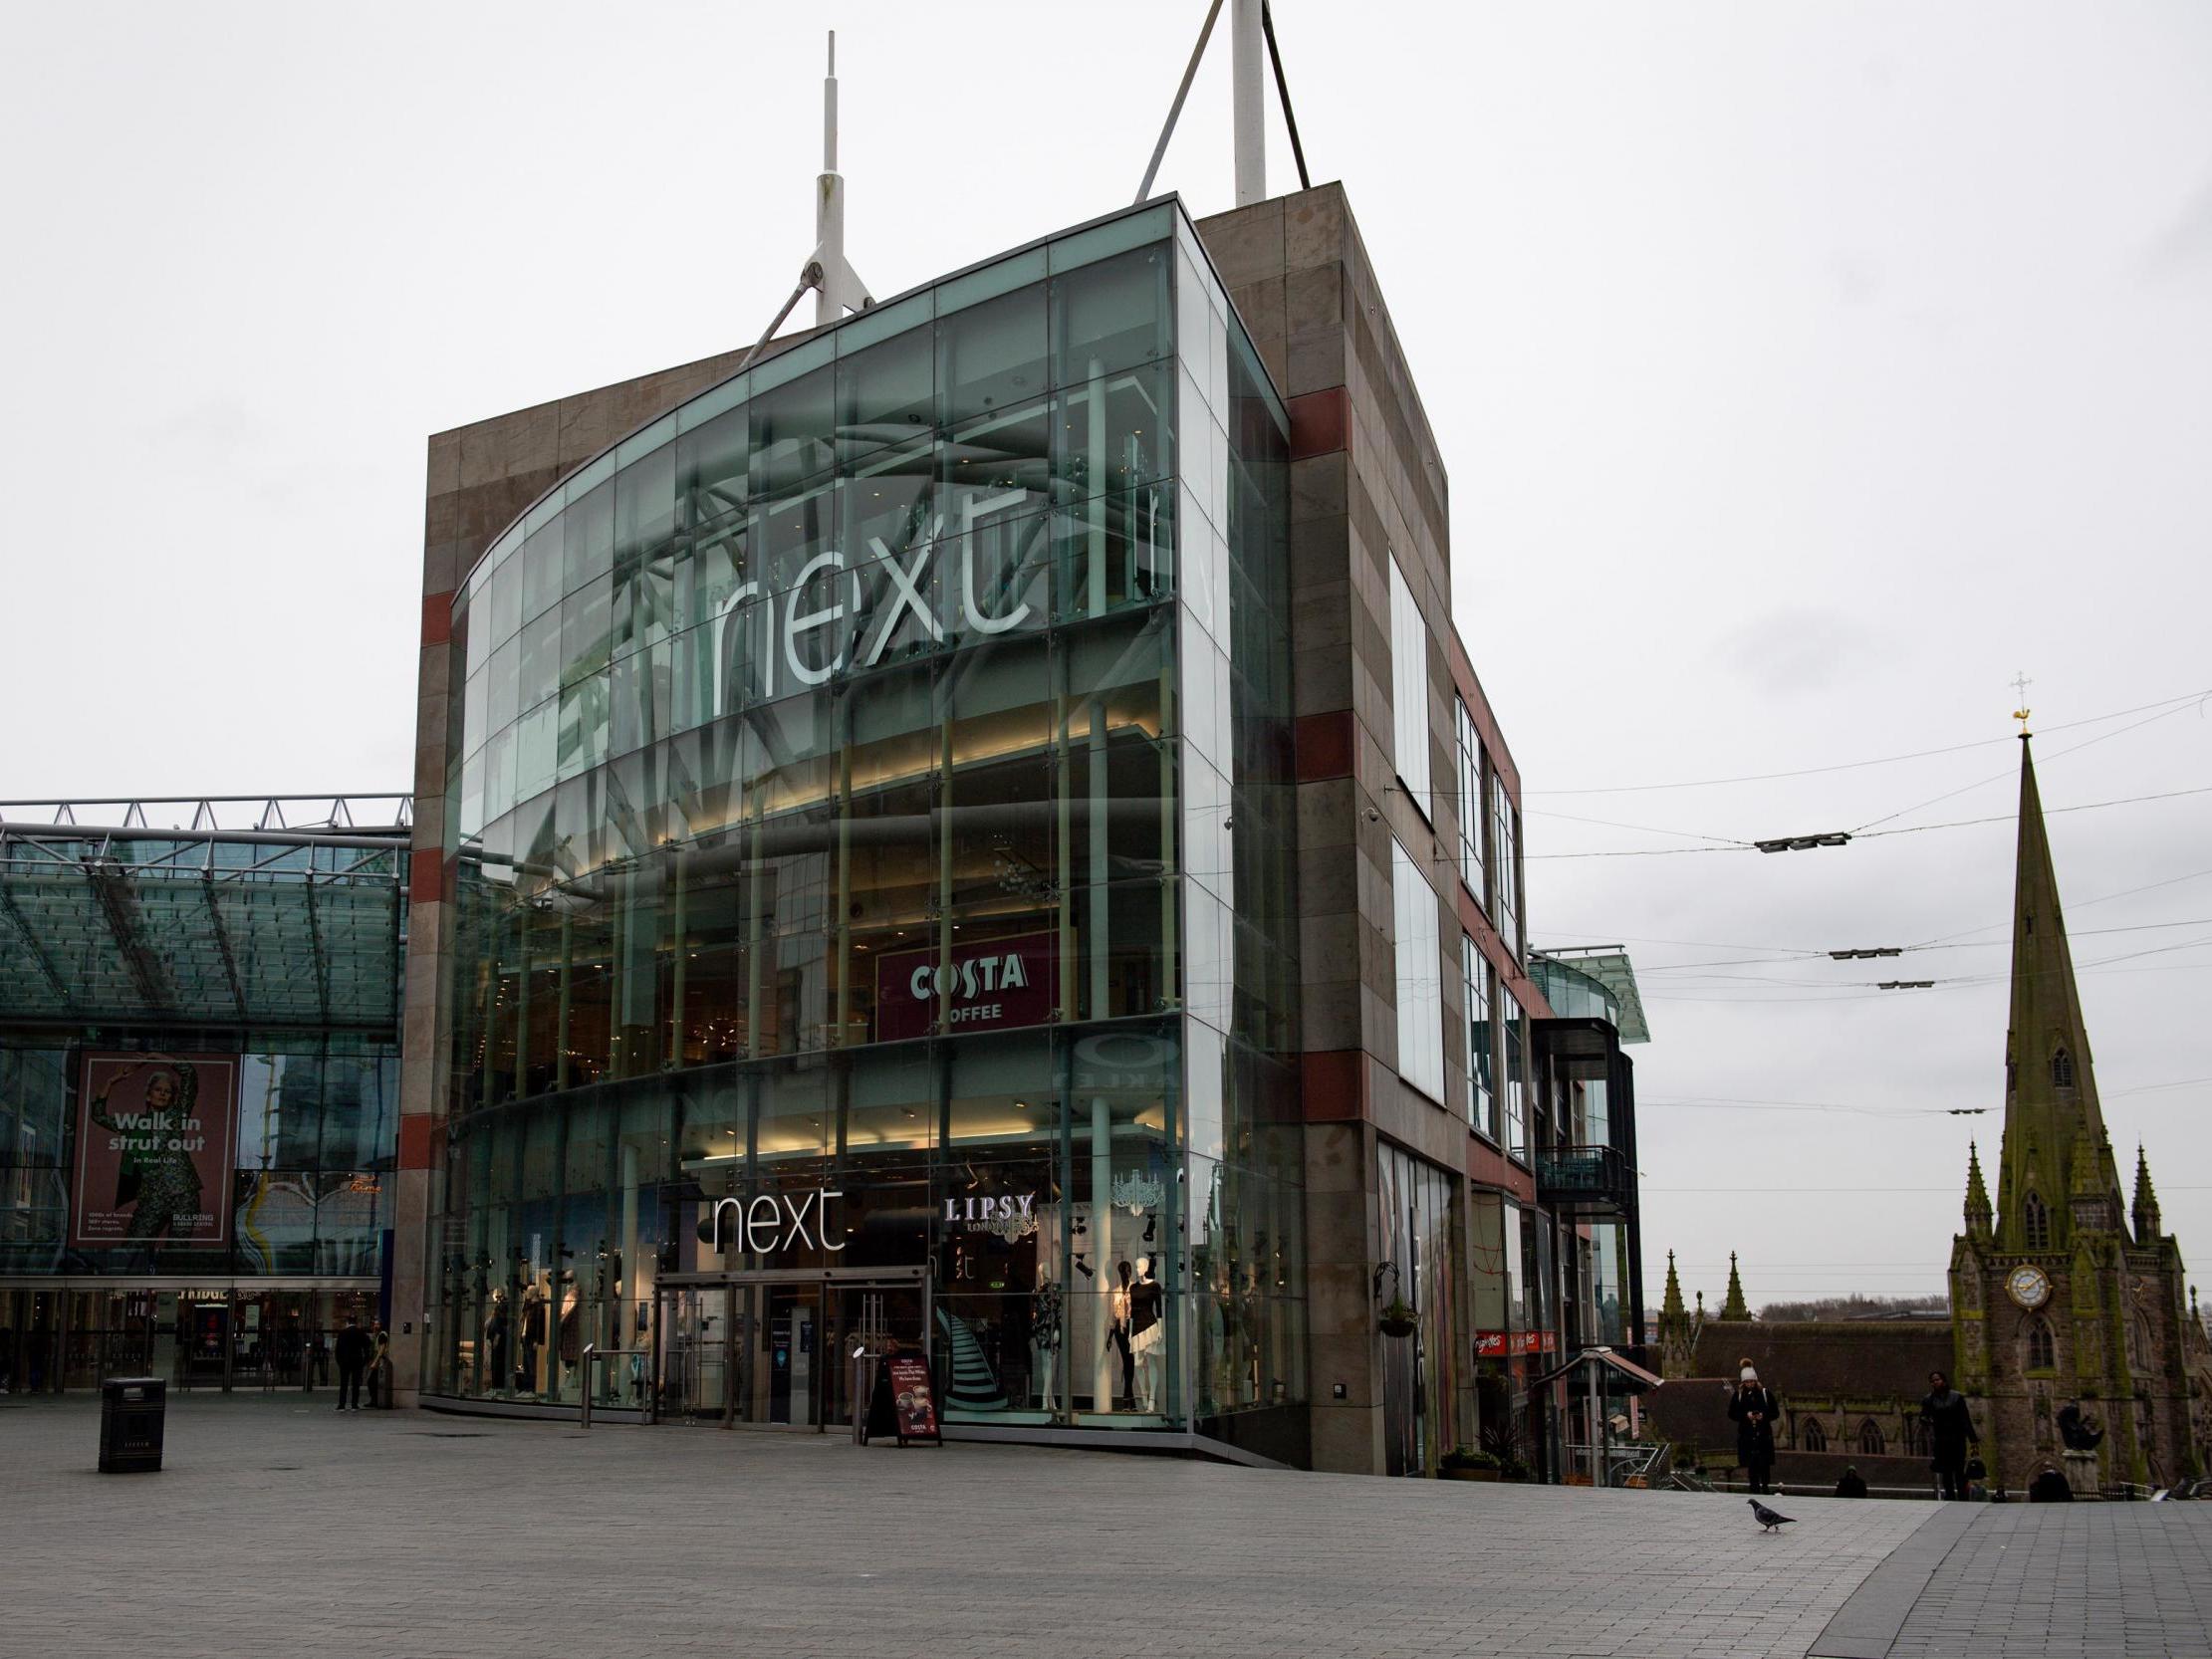 The shopping centre reopened shortly after the incident